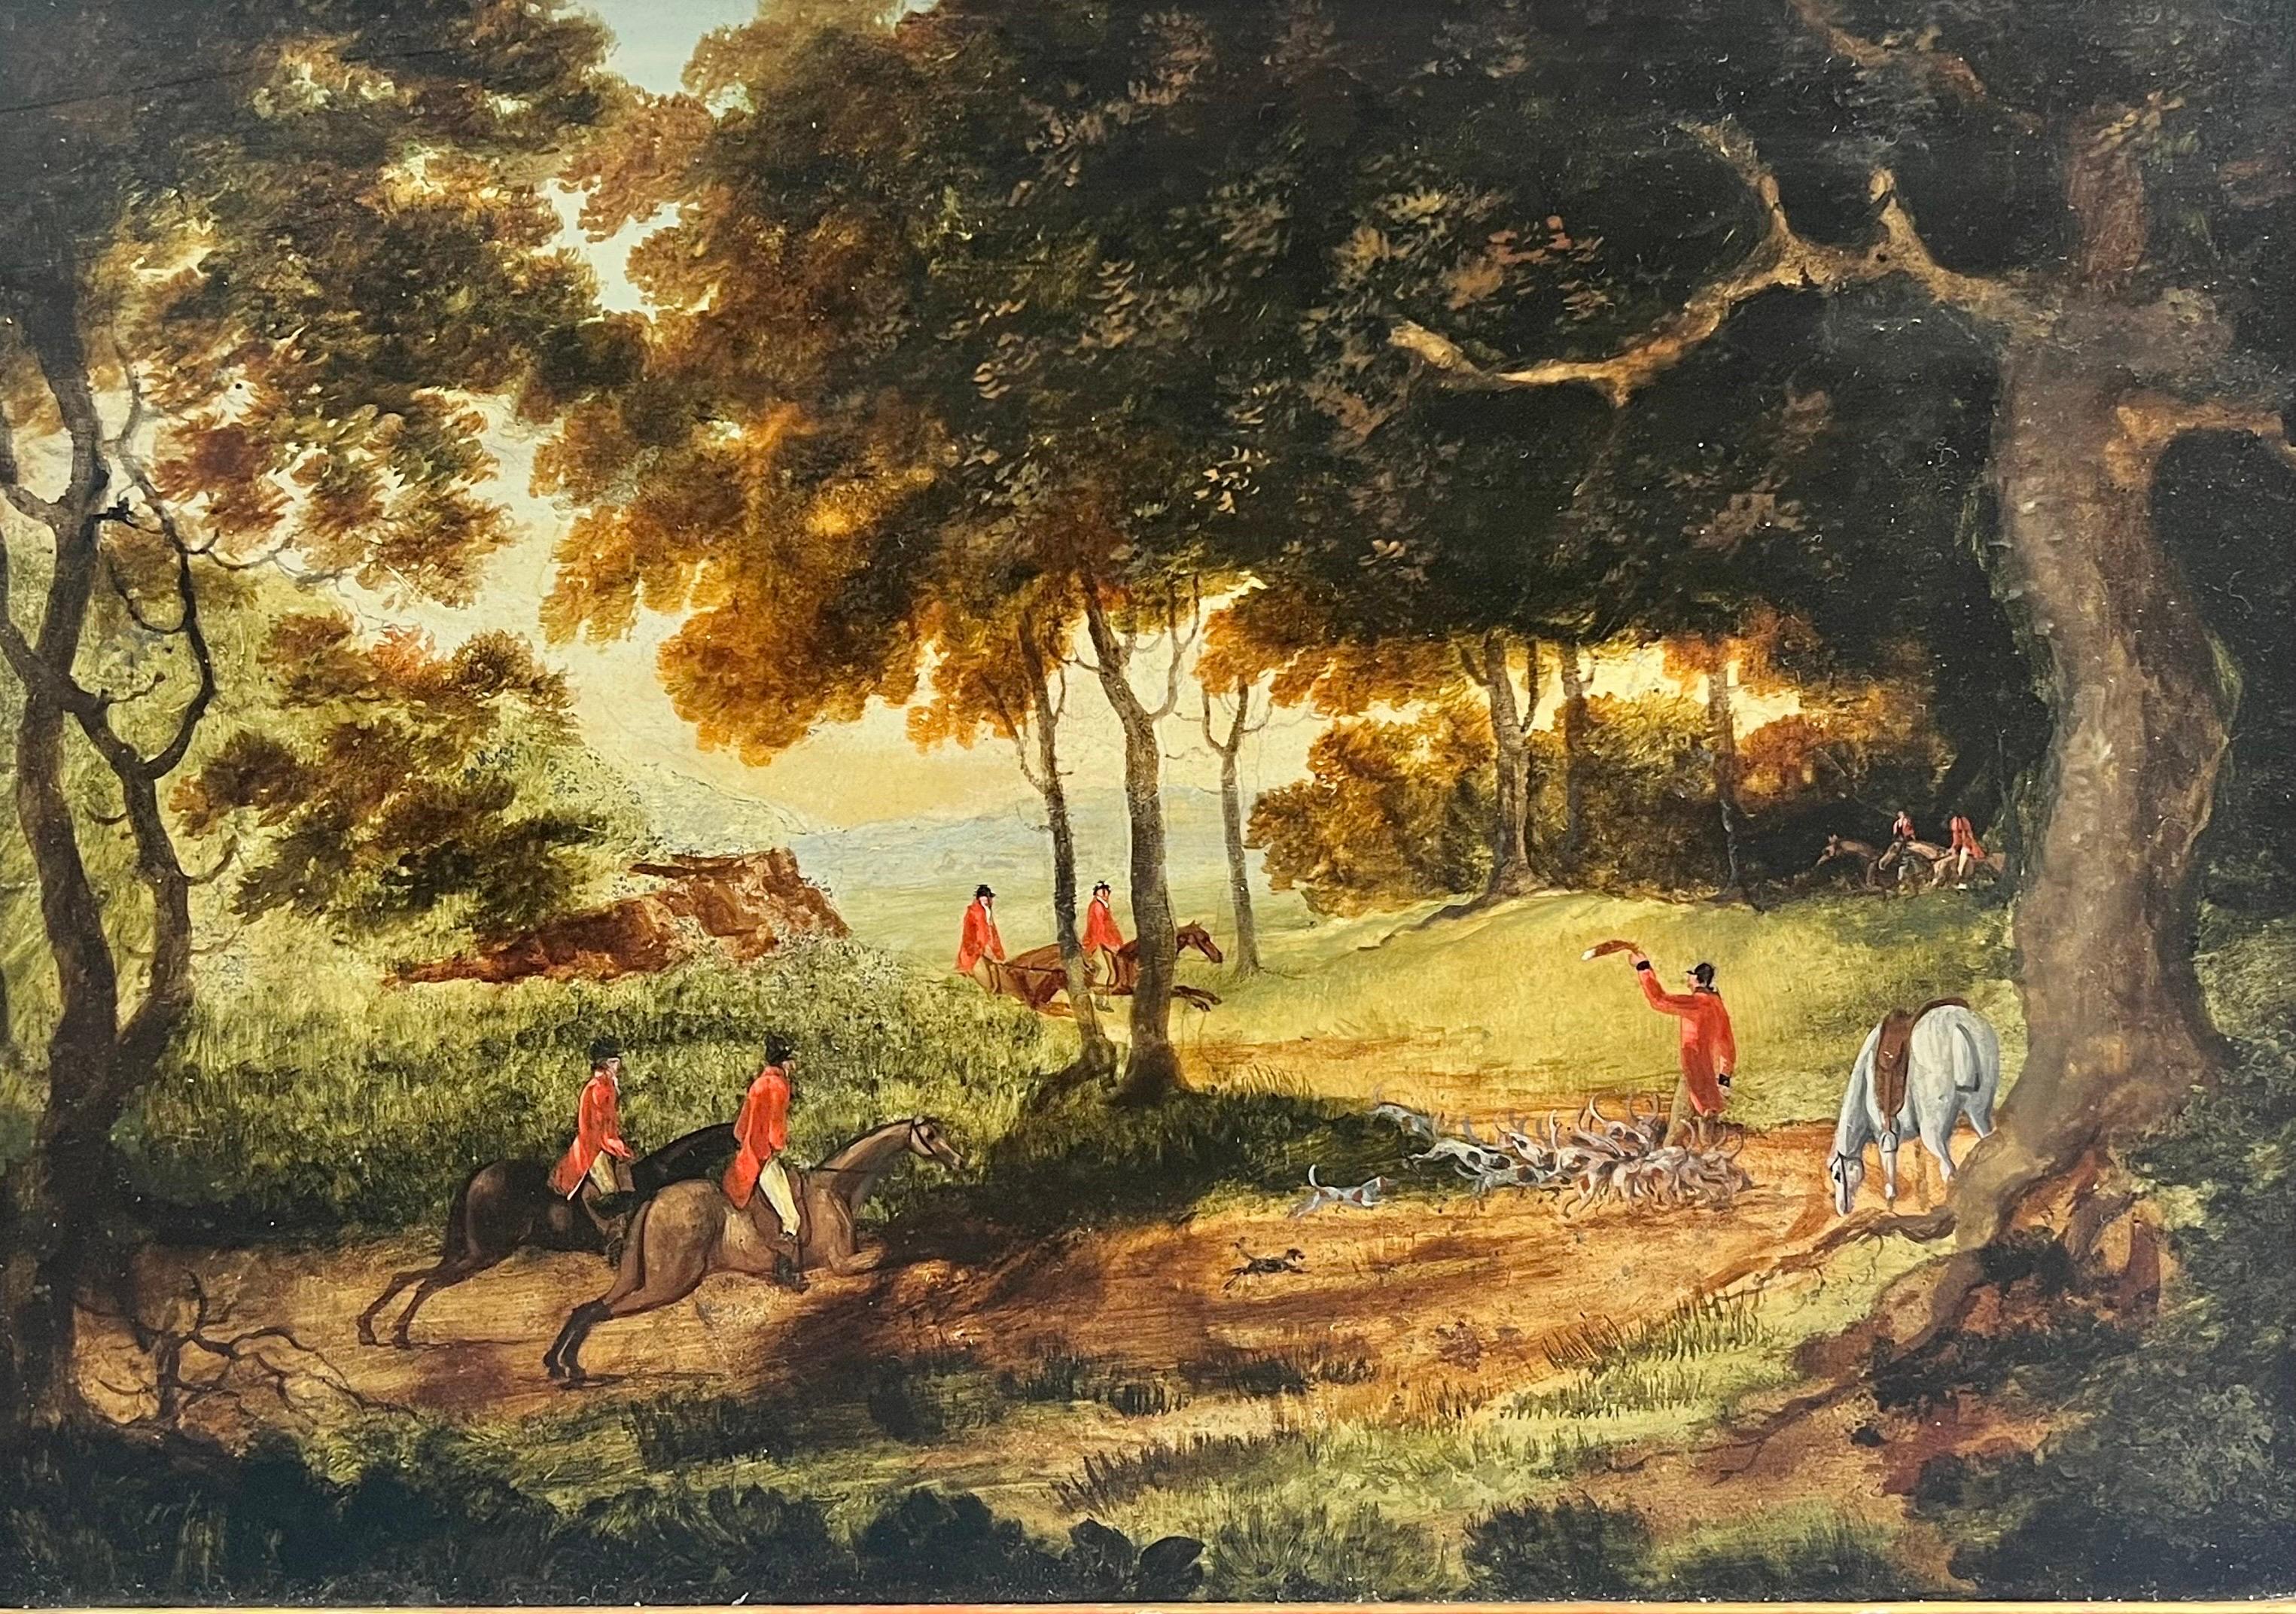 19th Century English School Animal Painting - 1850’s English Fox Hunting Scene Pack of Hounds, Huntsman & Horses in Woods